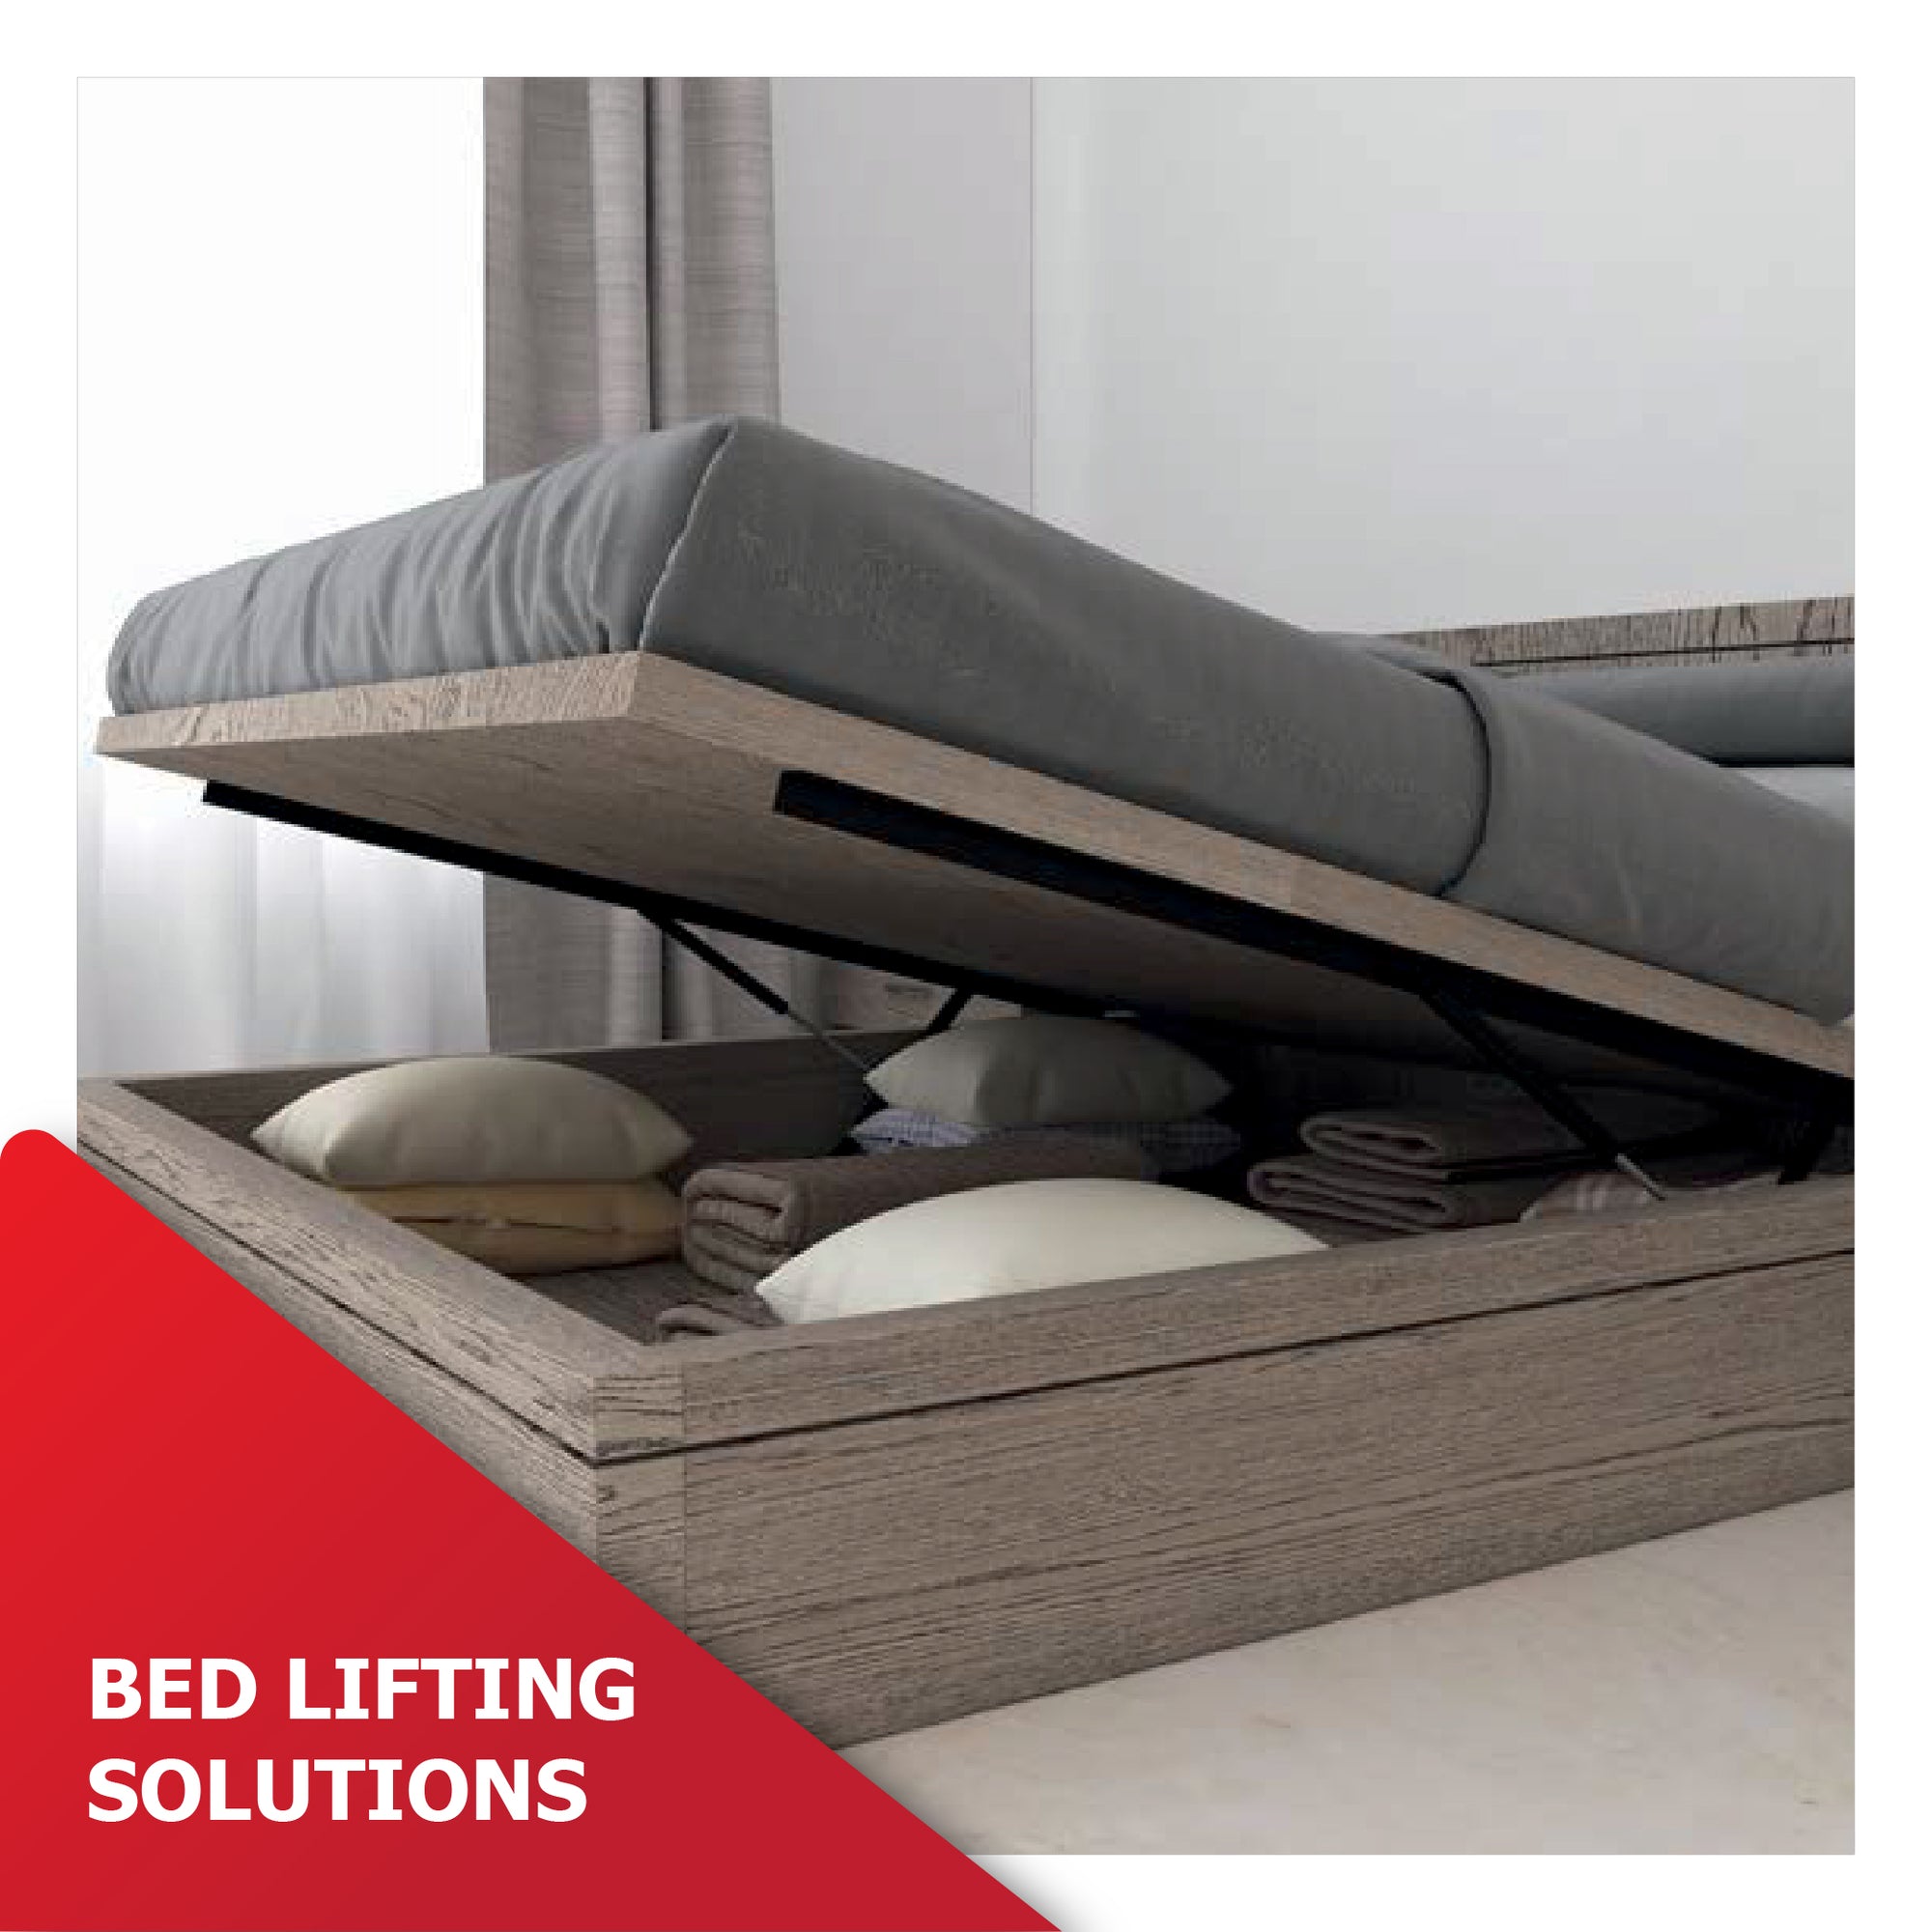 Bed Lifting Solutions | Category